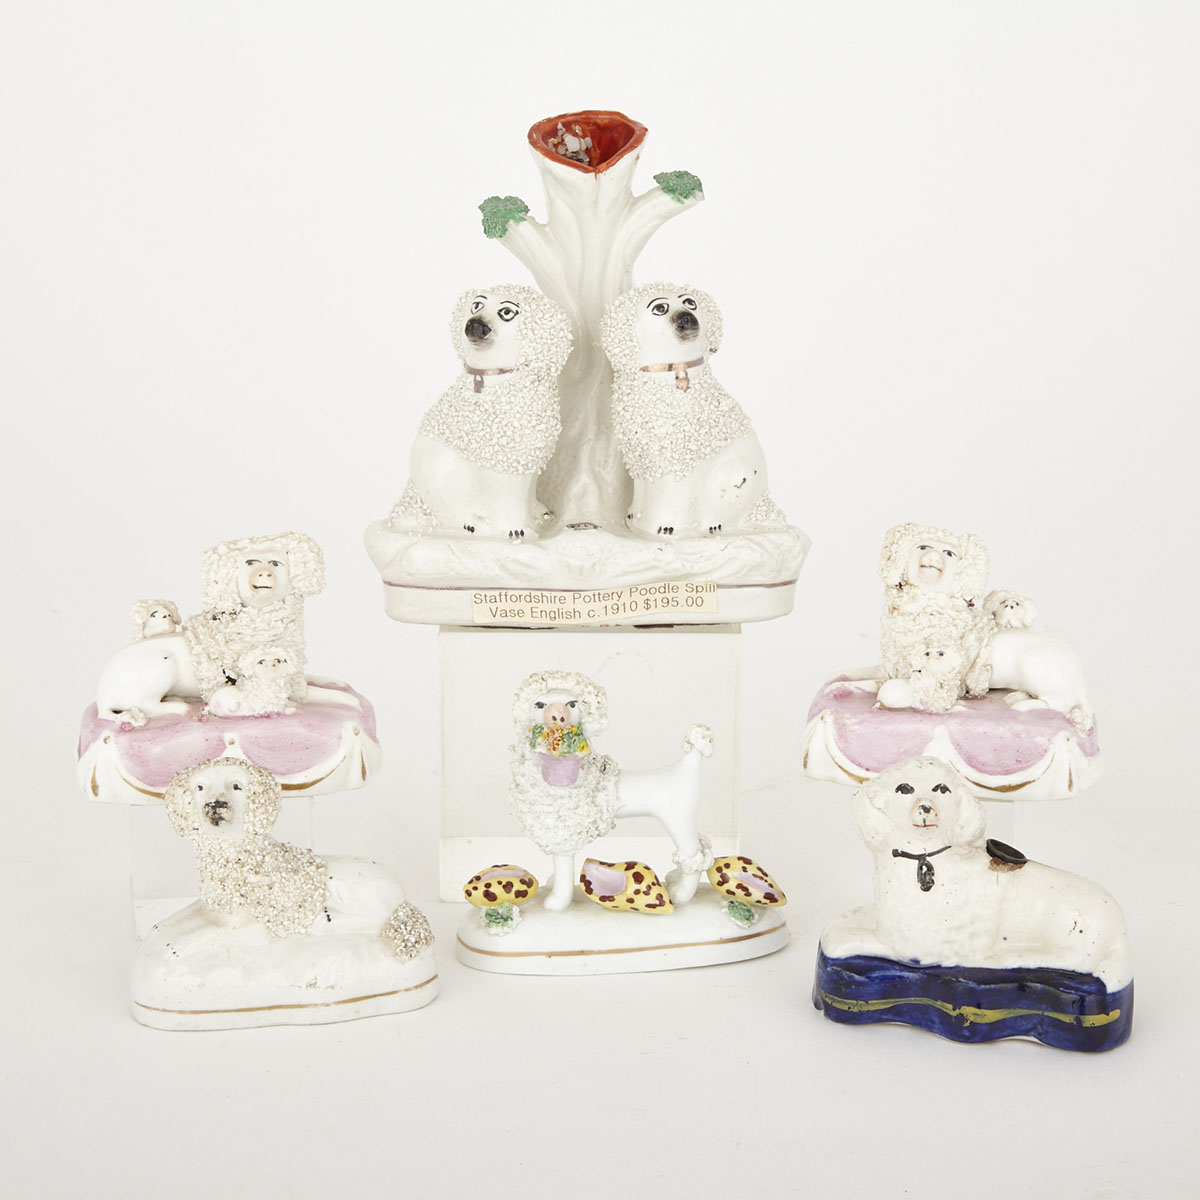 A Group of Staffordshire Pottery and Porcelain Articles with Small Dogs, 19th/20th century